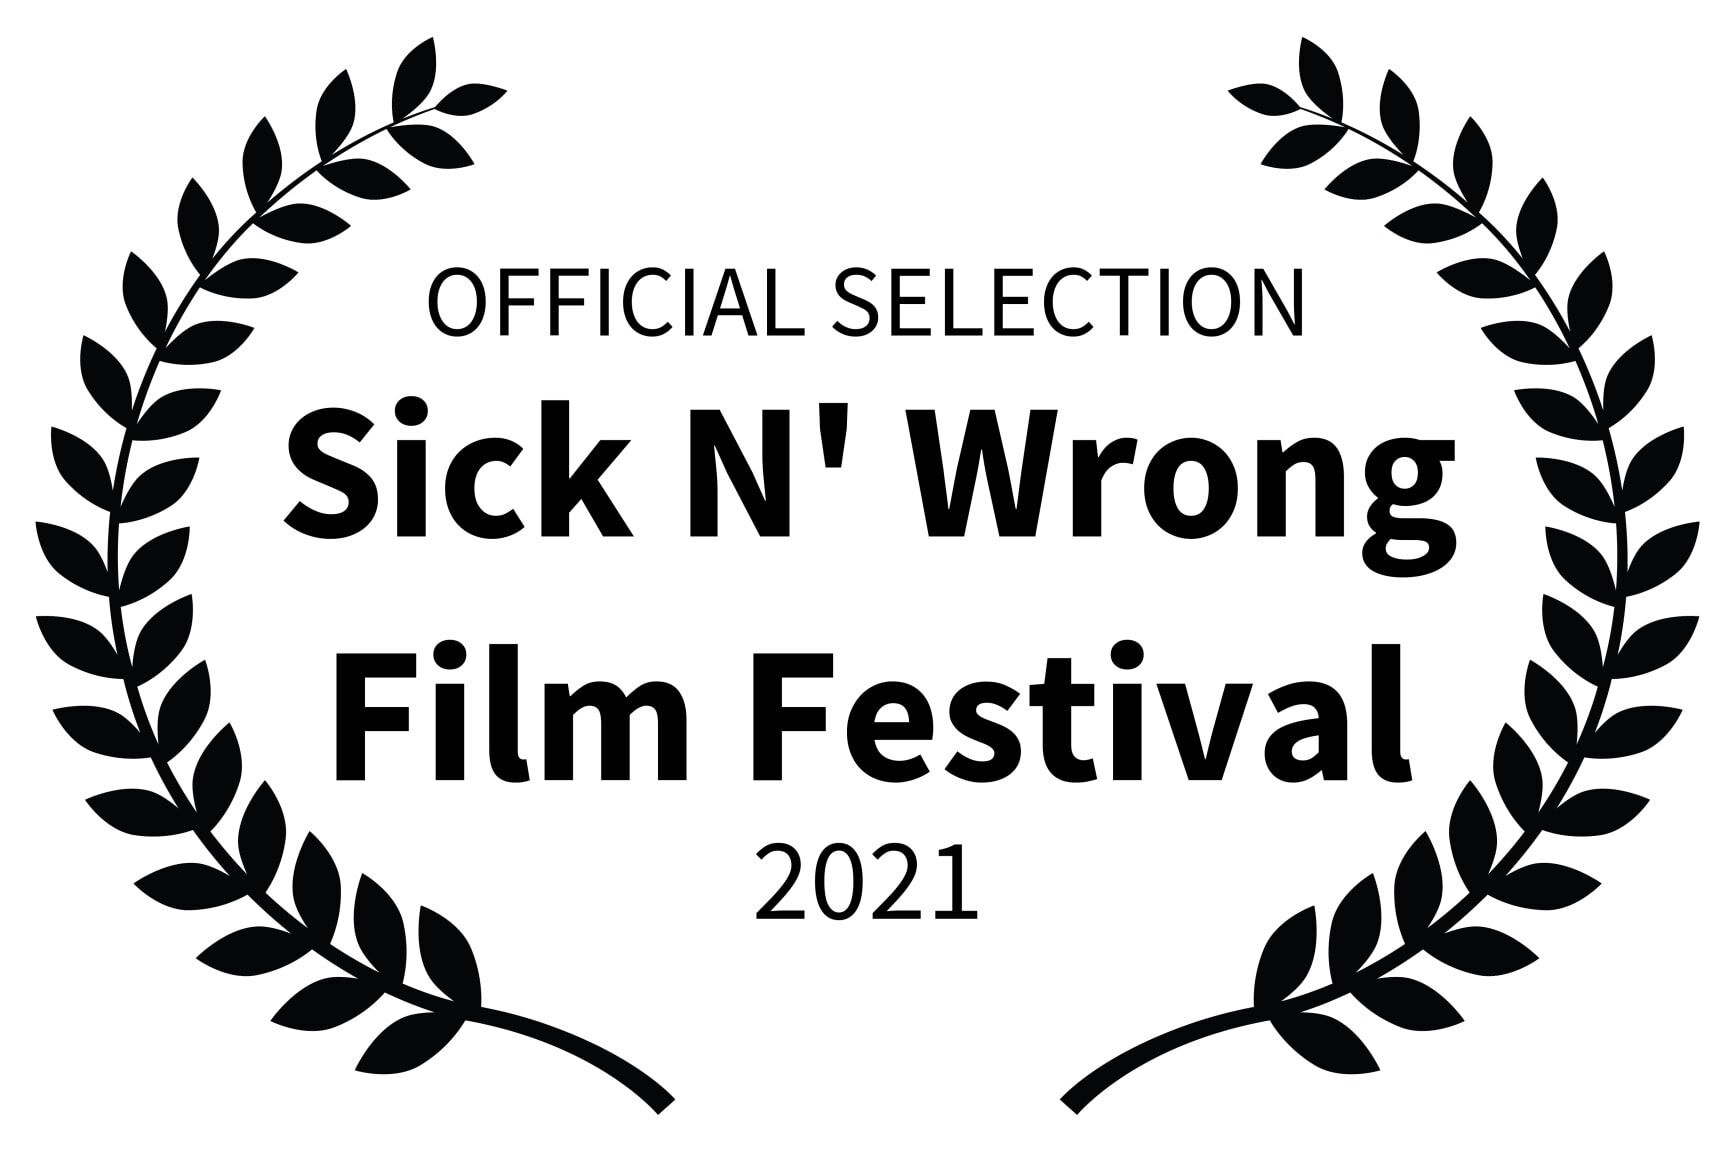 OFFICIAL SELECTION - Sick N Wrong Film Festival - 2021